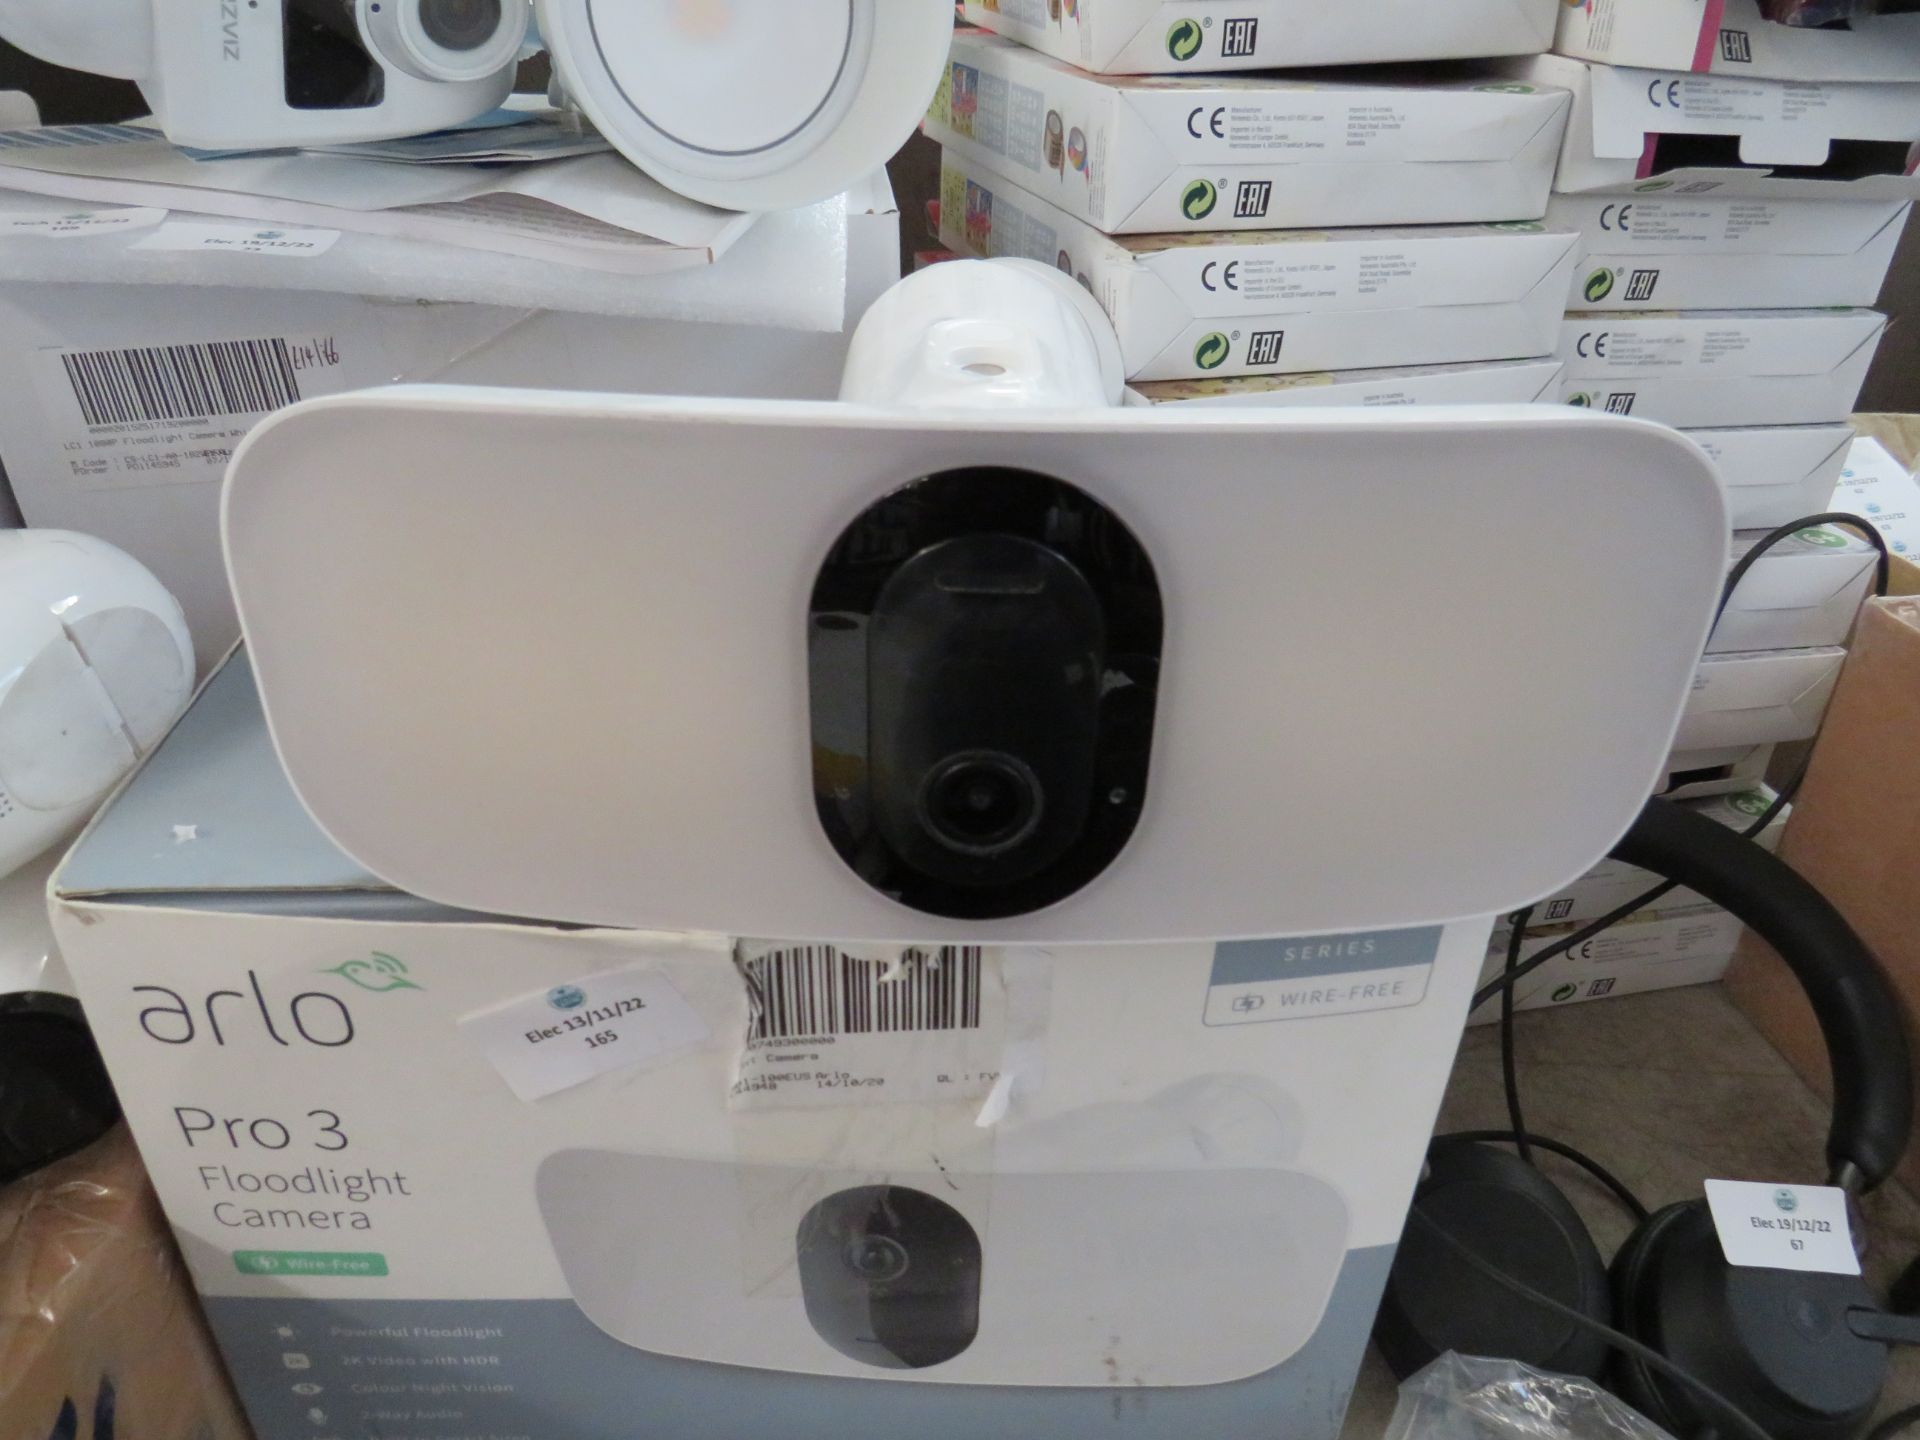 Arlo Pro 3 wire free Flood light camera, powers on and the light comes on but we havent set it up